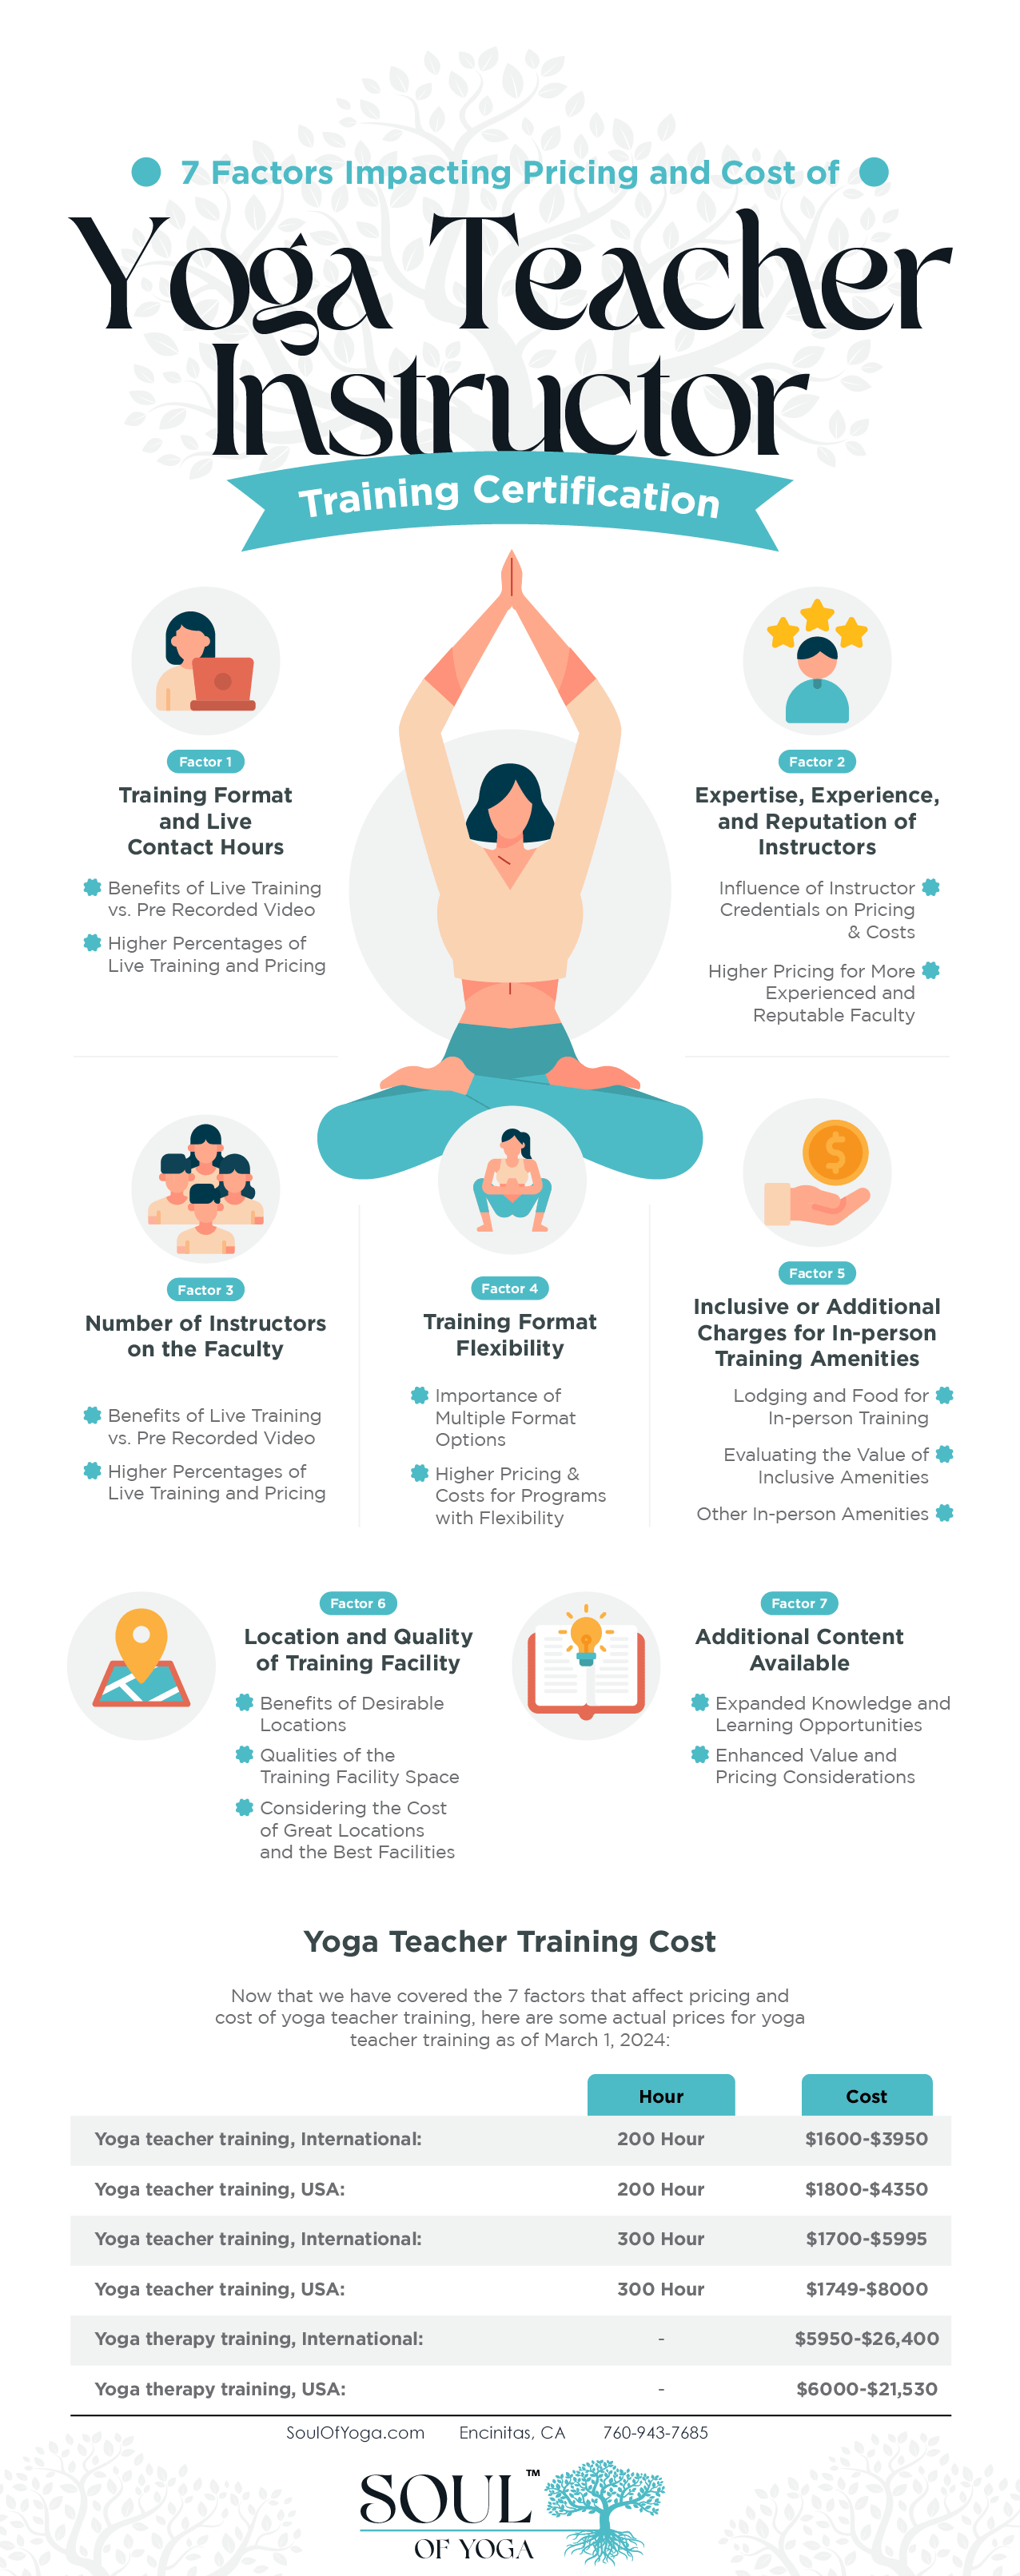 7 Factors Impacting Pricing & Cost of Yoga Teacher Training & Instructor Certification Infographic